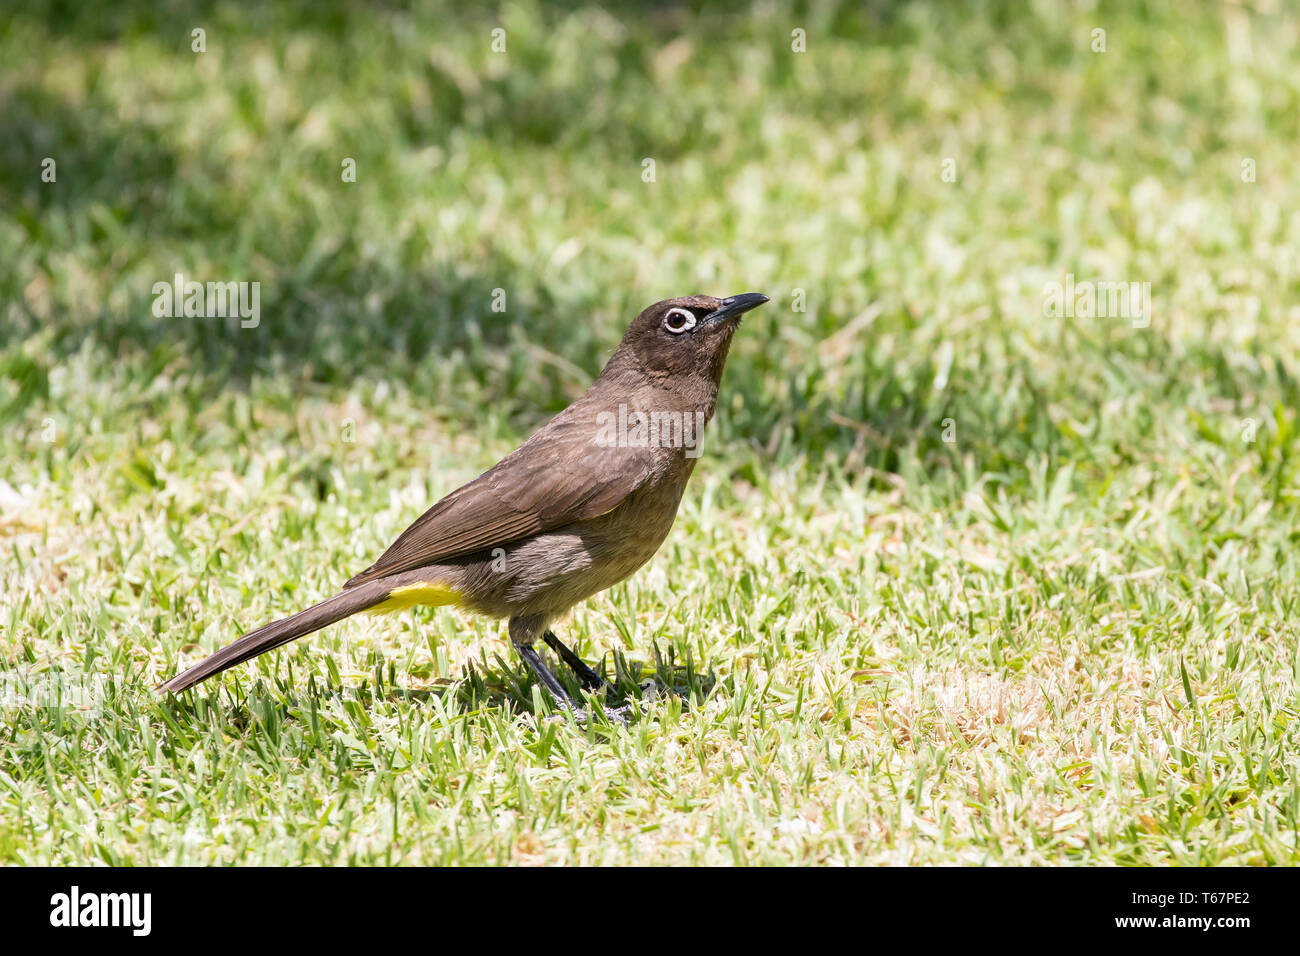 Cape Bulbul, Pycnonotus capensis,  standing on grass, side view, endemic to Western Cape, South Africa Stock Photo